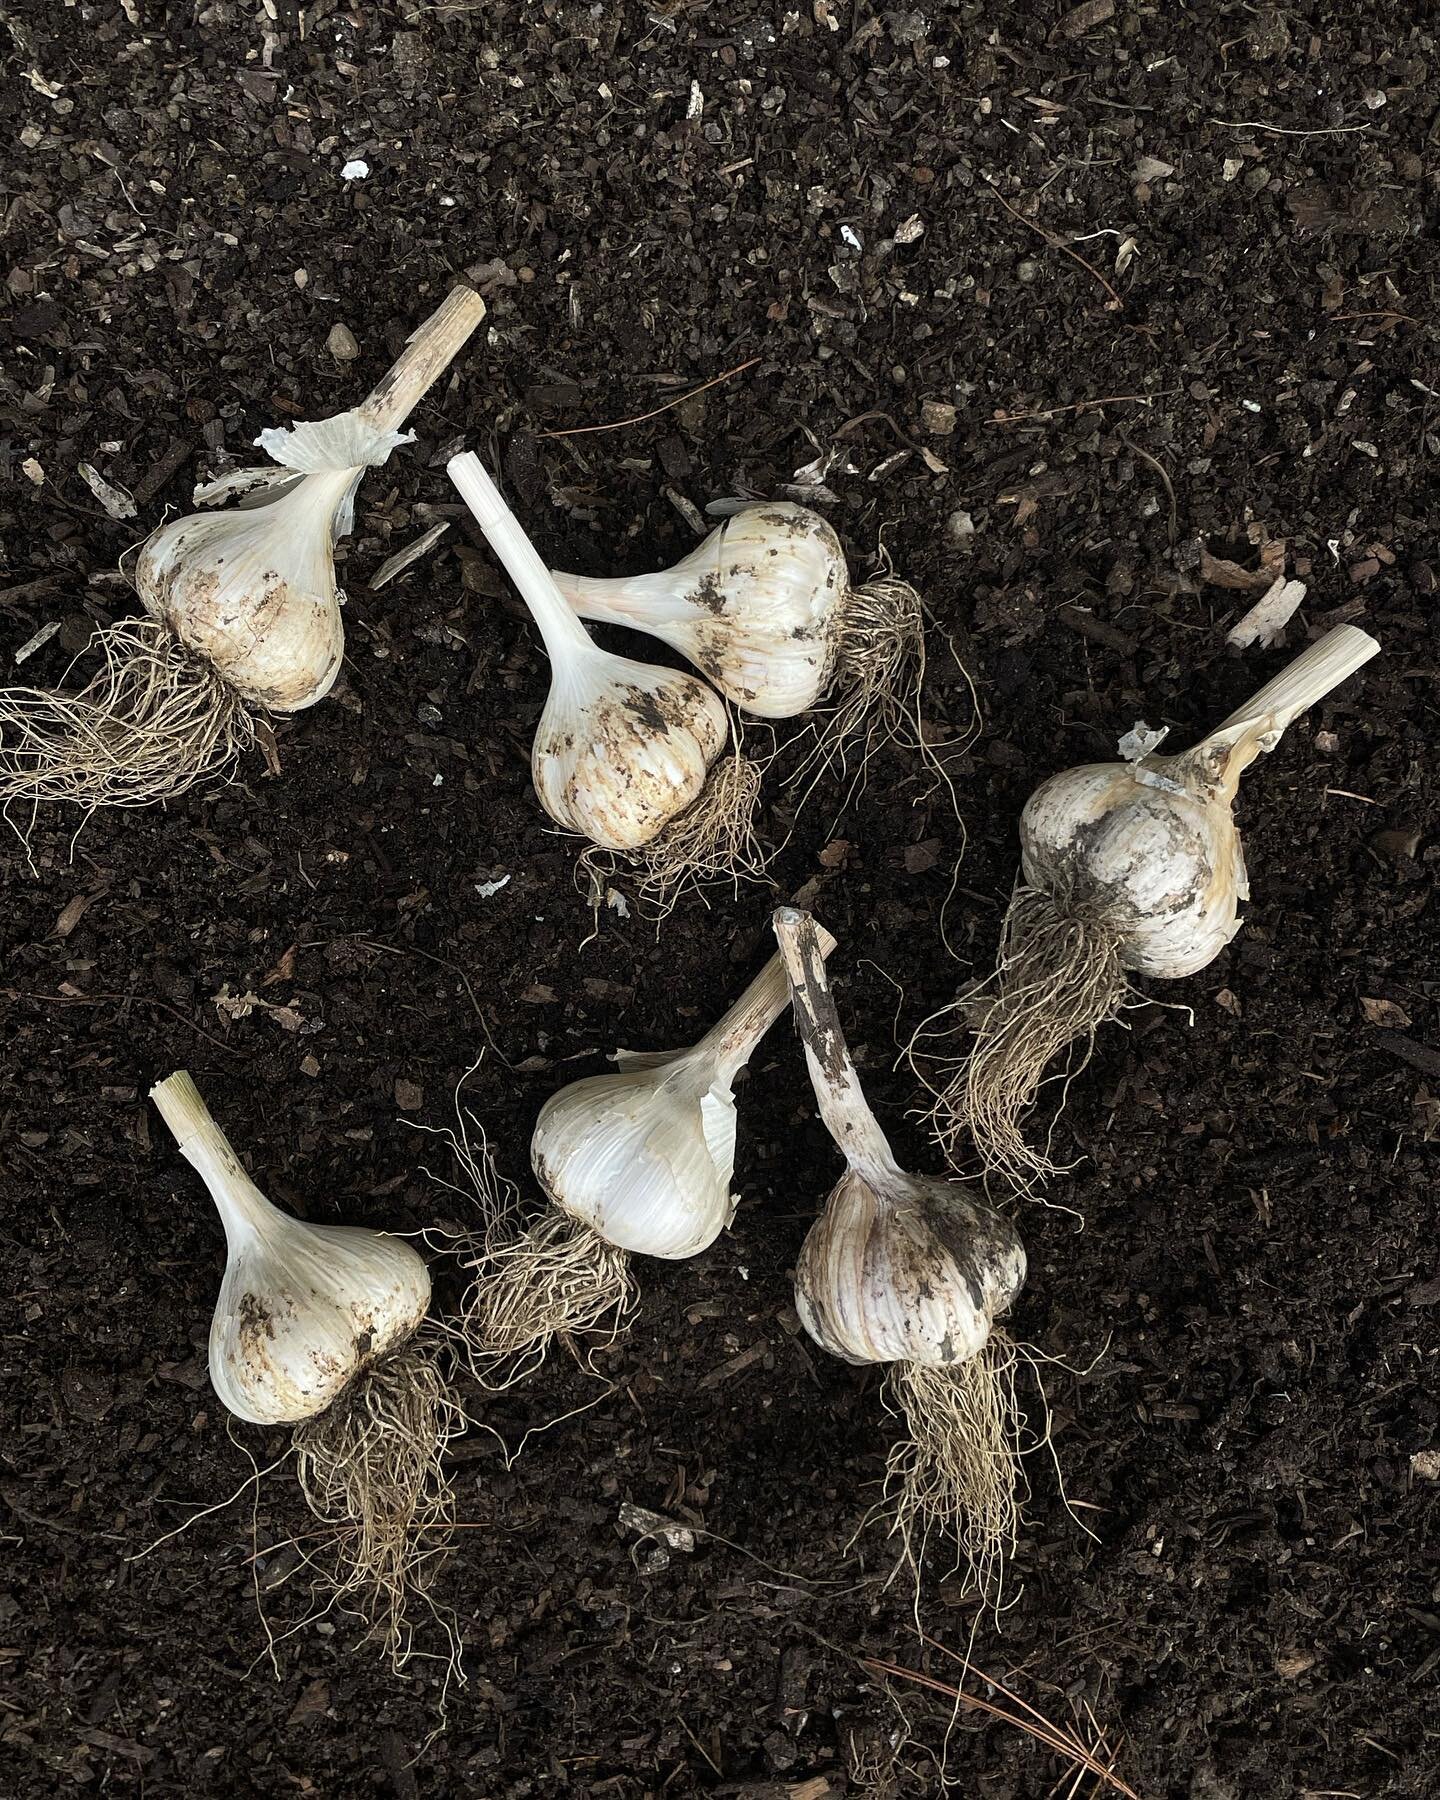 planted garlic with my sweet little team yesterday, it was warm, and quiet. 
we watched the monarch&rsquo;s dance around the marigolds and the worms wiggle out of the holes we dug.
my gratitude continuously swells for all of the folks who have contri